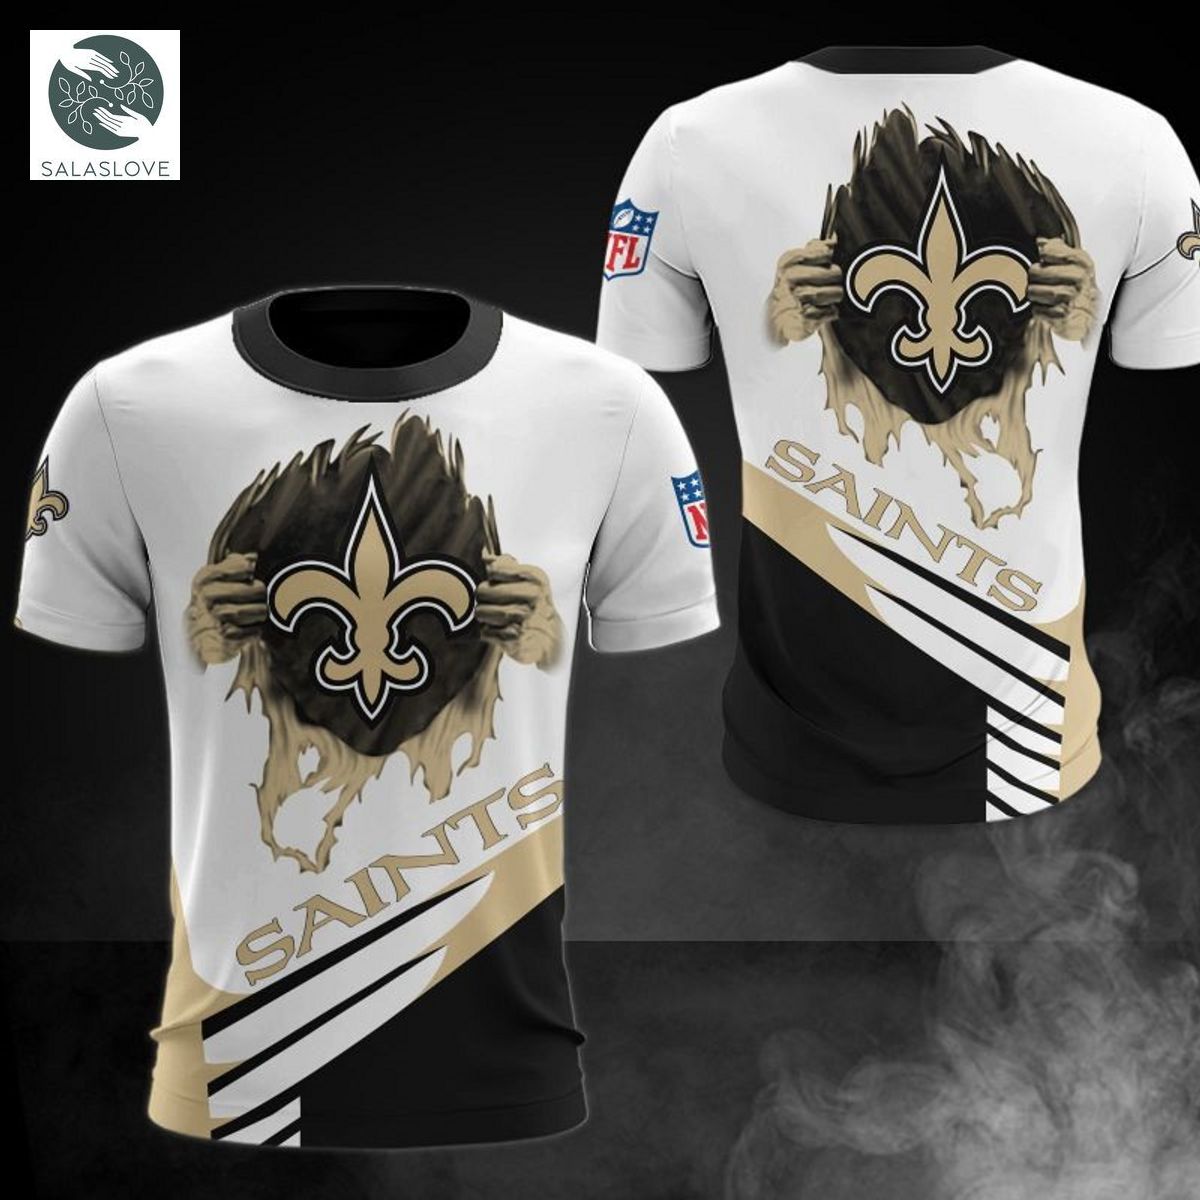 New Orleans Saints T-shirt cool graphic gift for men